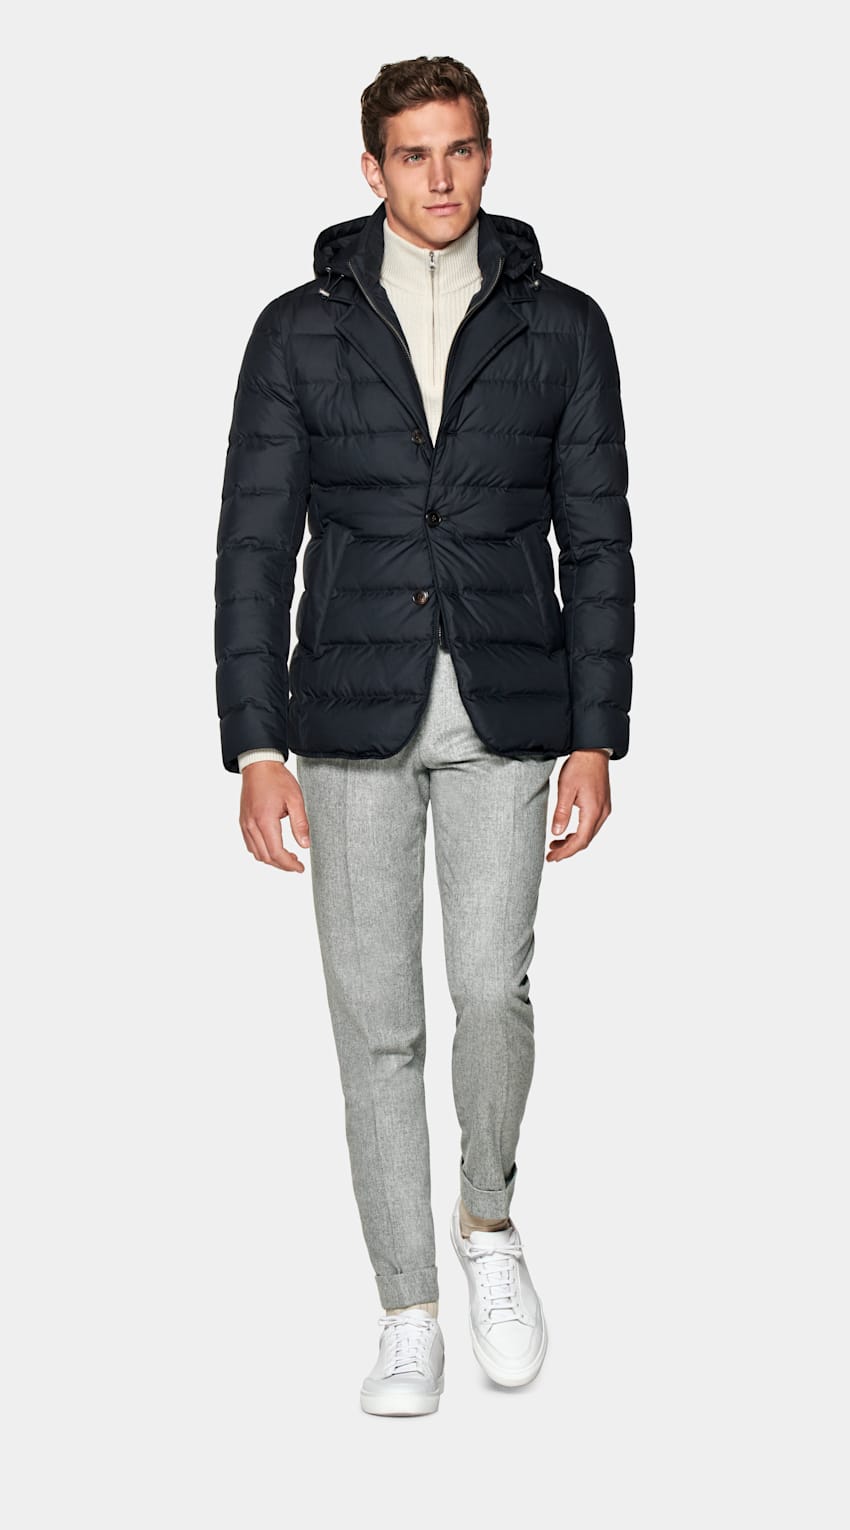 SUITSUPPLY Water-Repellent Technical Fabric by Olmetex, Italy Navy Down Jacket